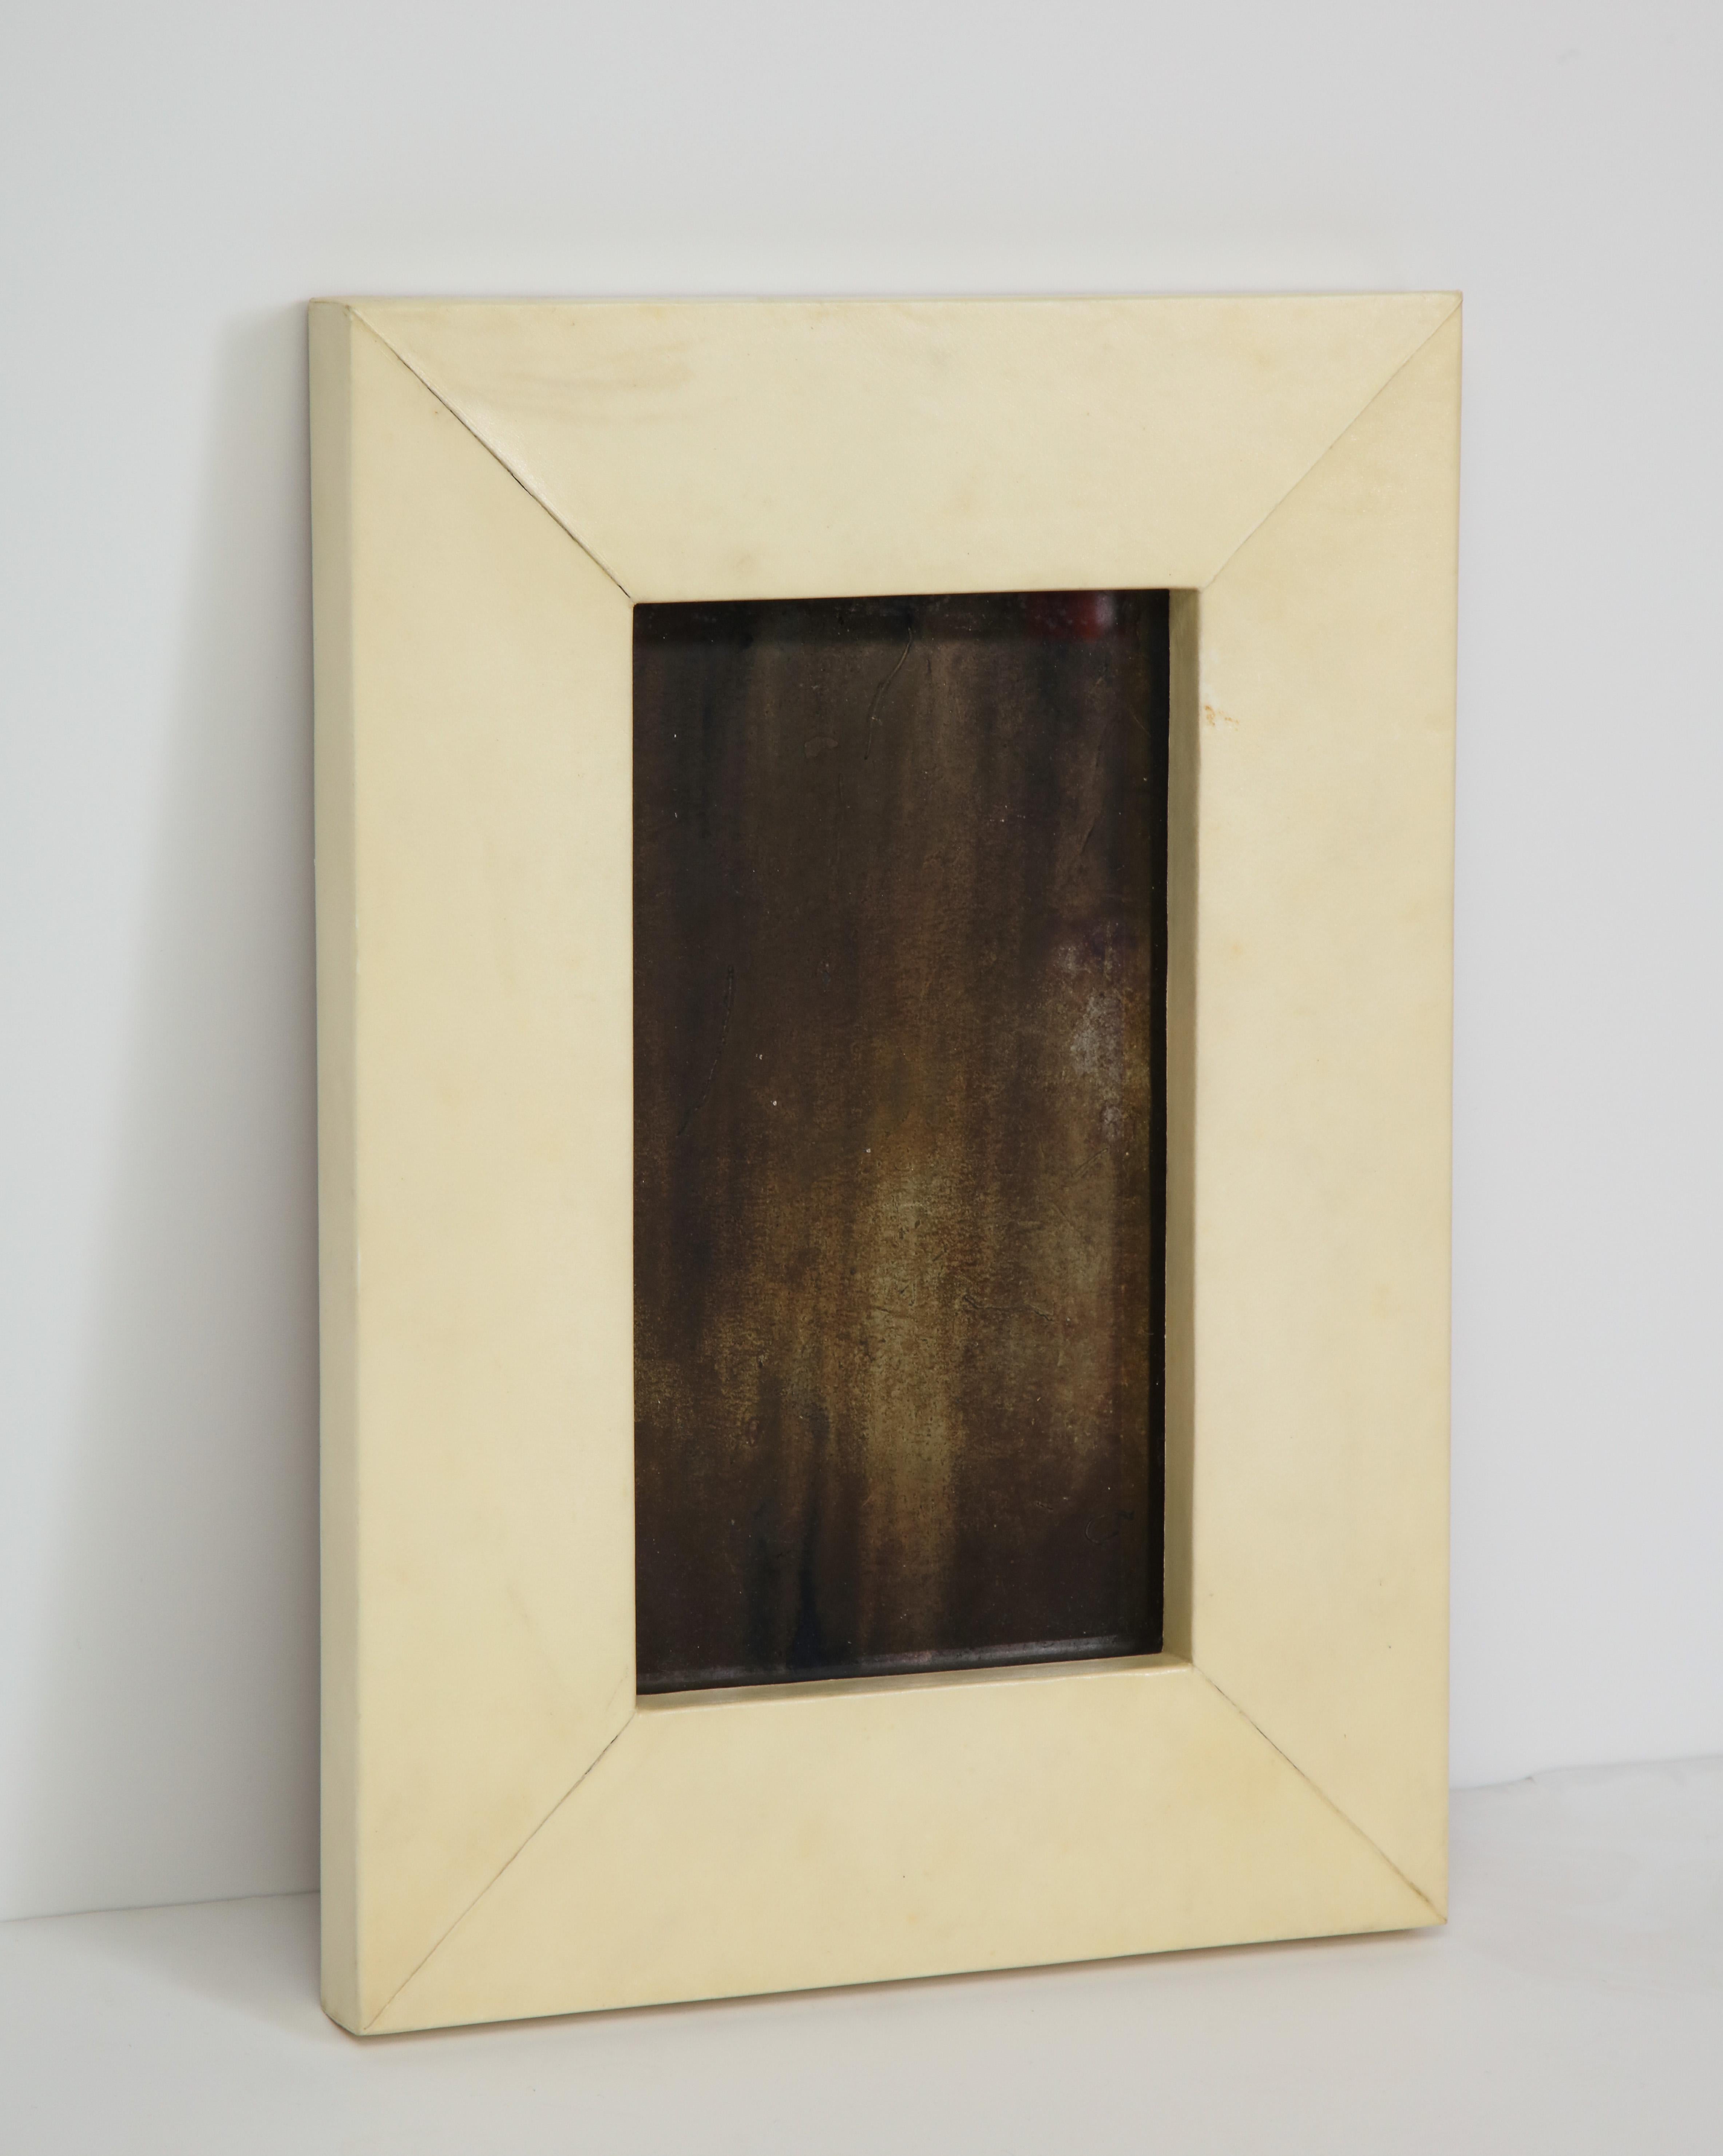 Lacquered cream parchment frame around antiqued (not reflective) mirror, from Thailand. Contemporary.